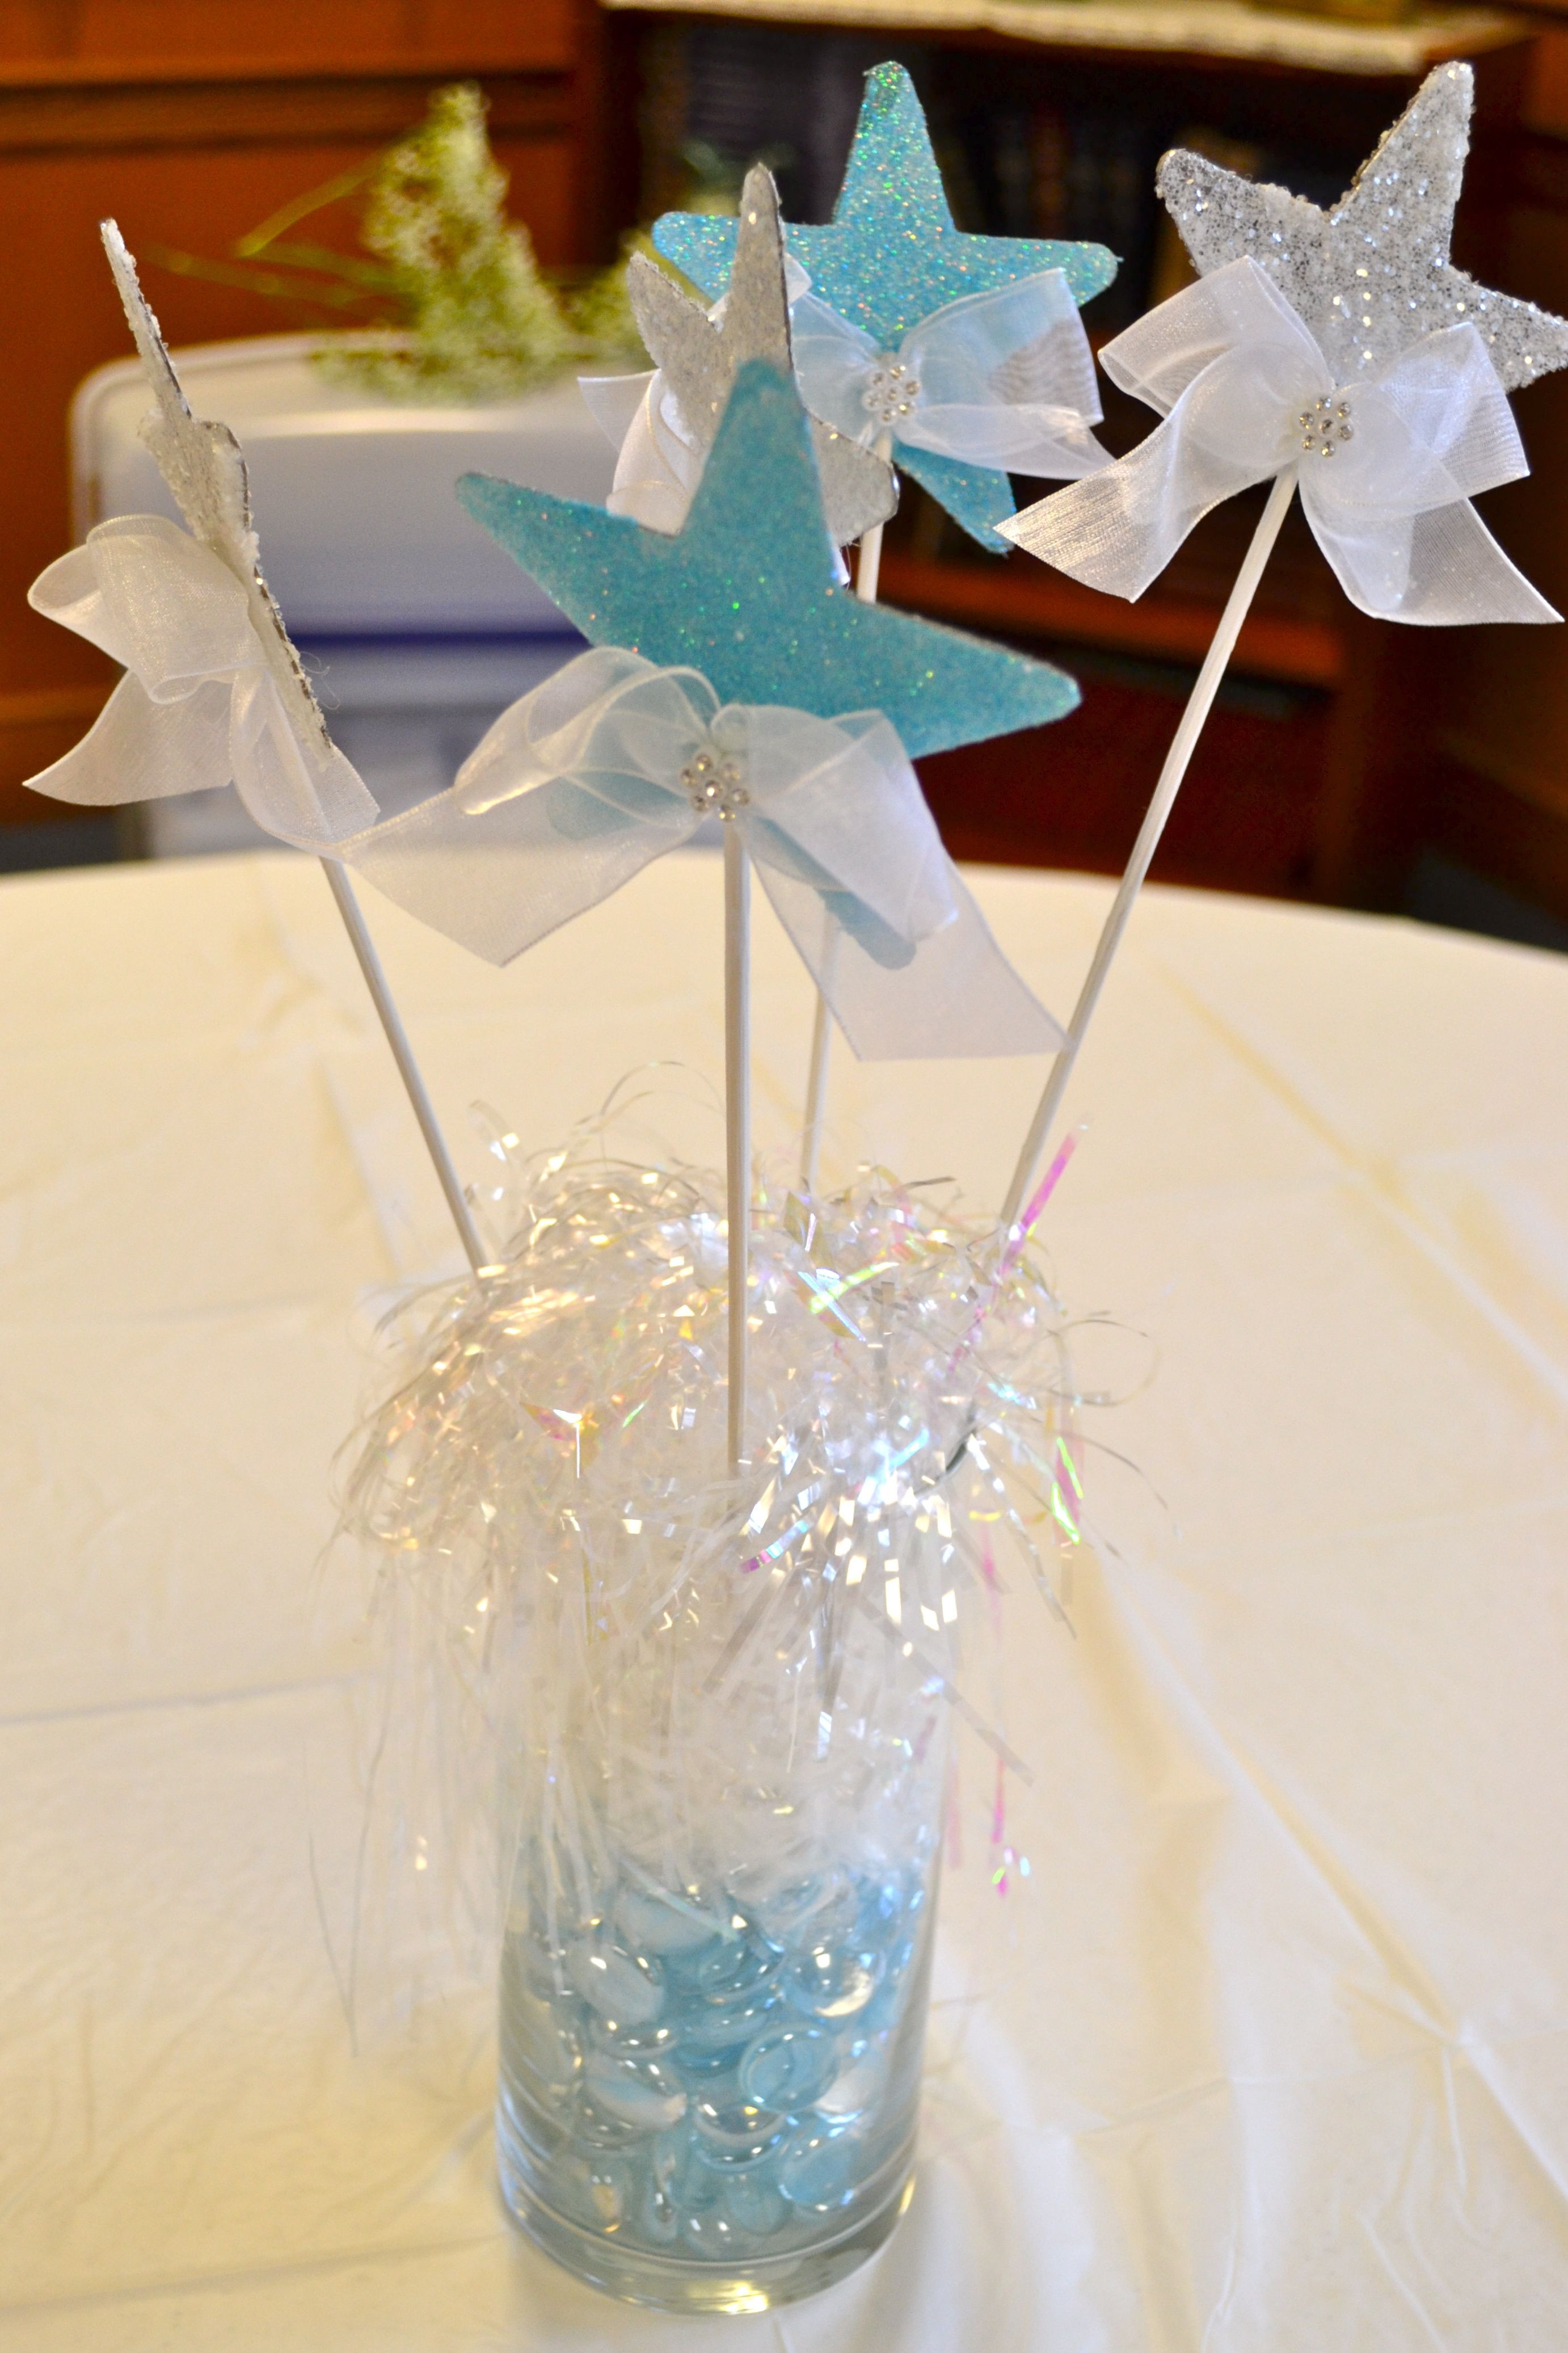 29 Popular Inexpensive Silver Vases 2024 free download inexpensive silver vases of little star centerpieces empty glass vase filled with silver with regard to little star centerpieces empty glass vase filled with silver white and blue shiny stuf